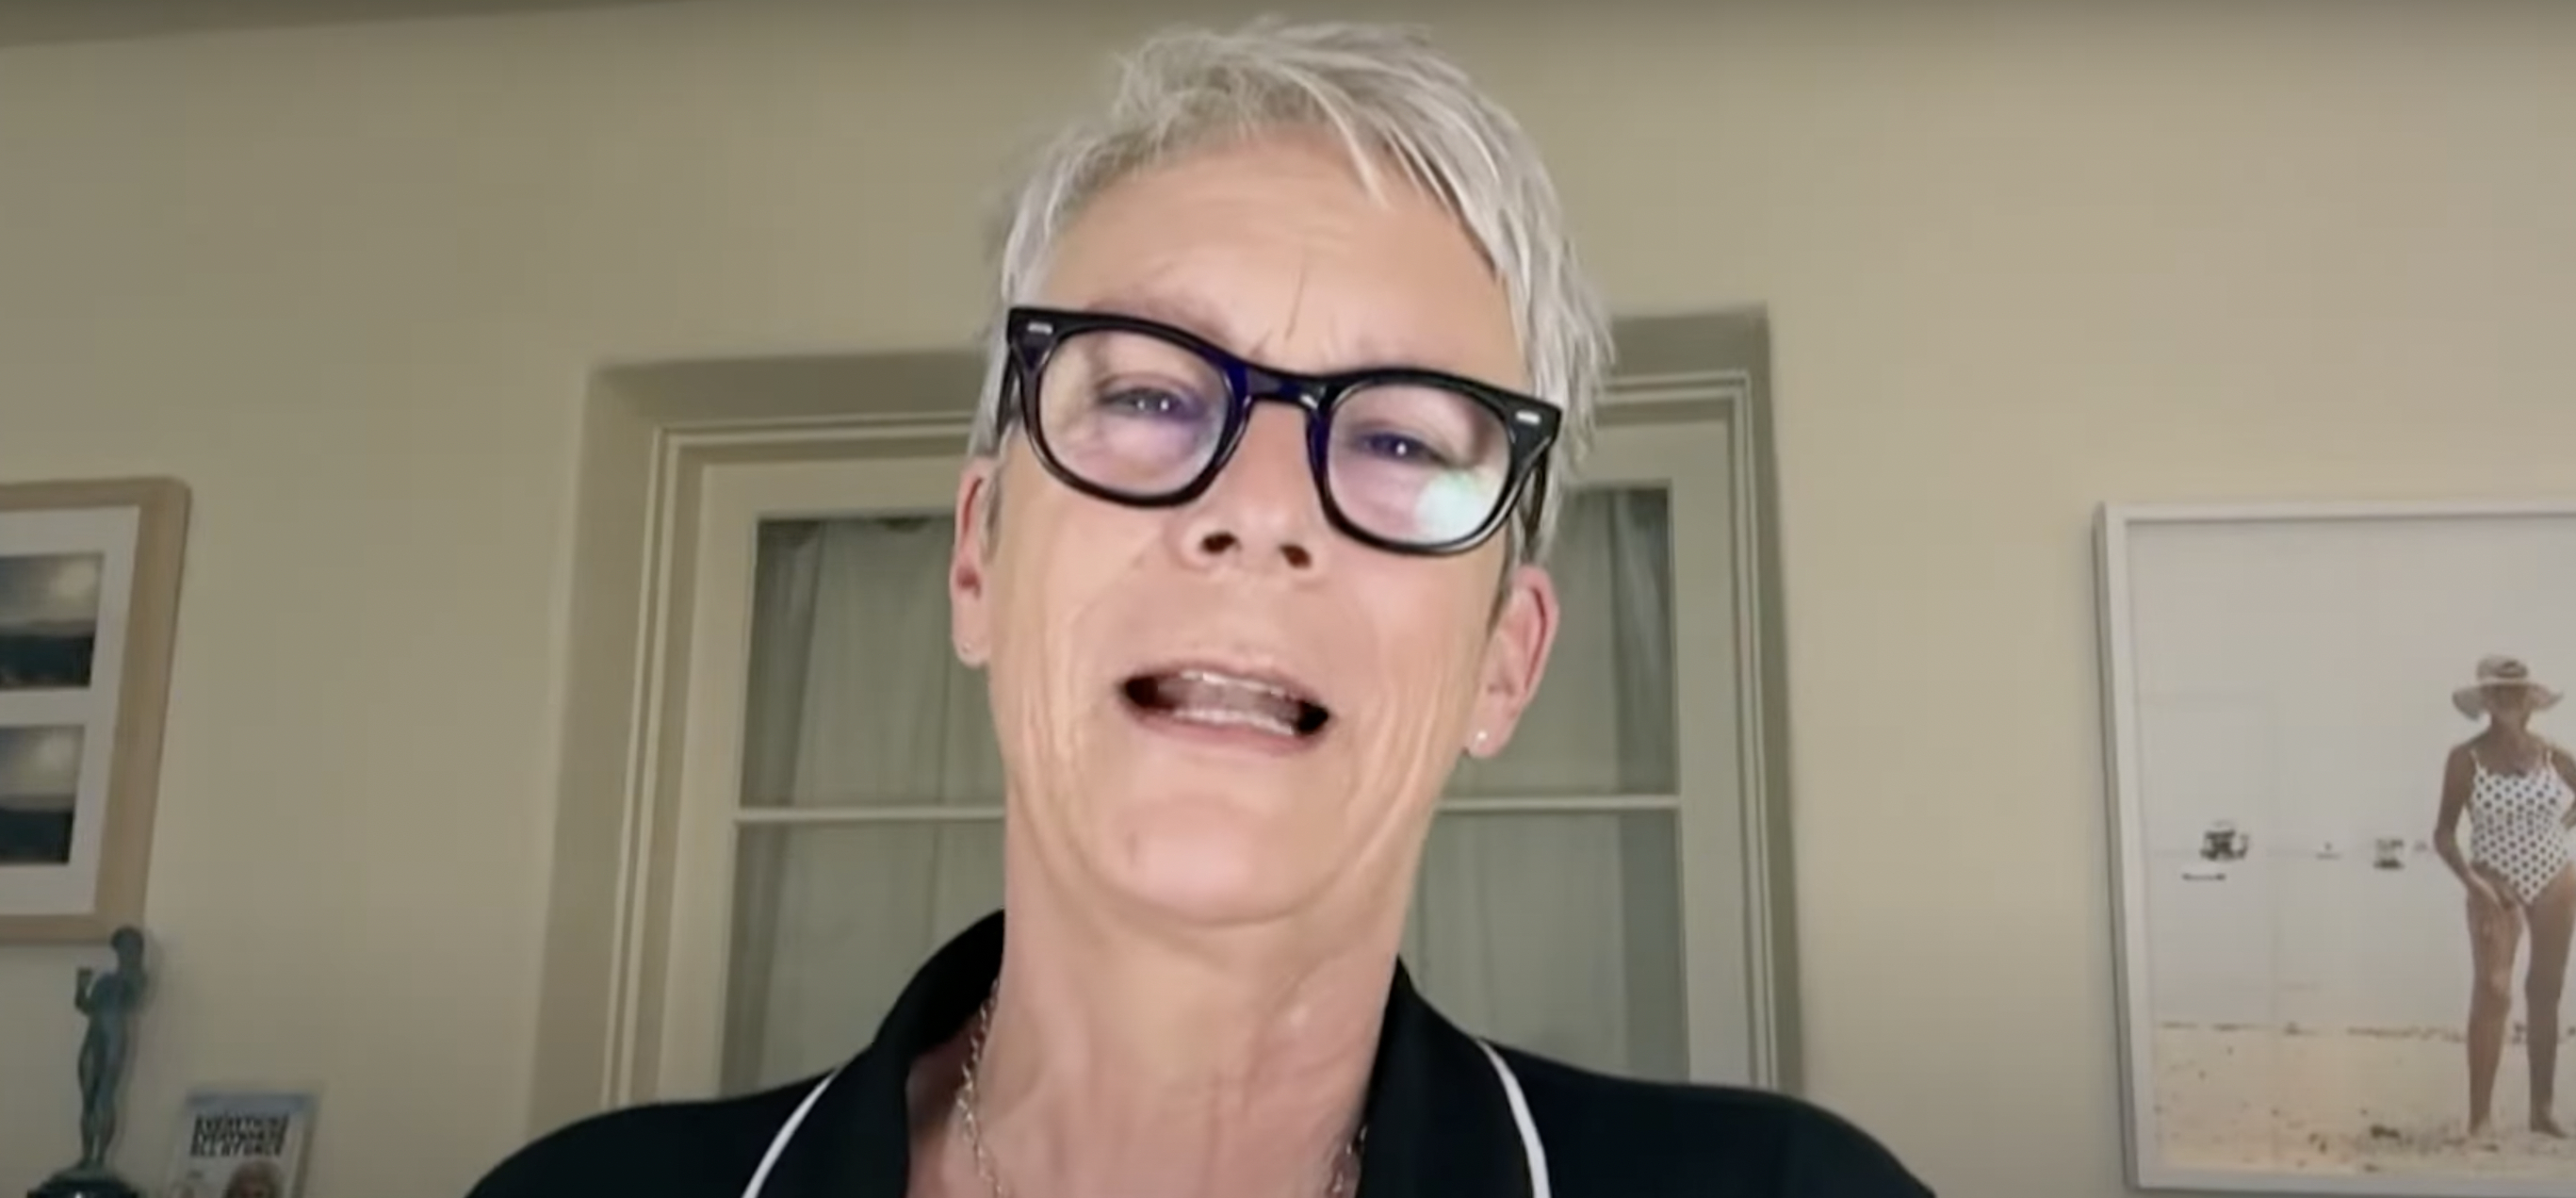 Jamie Lee Curtis appears virtually on the "Today" show on March 14, 2023 | Source: YouTube/TODAY